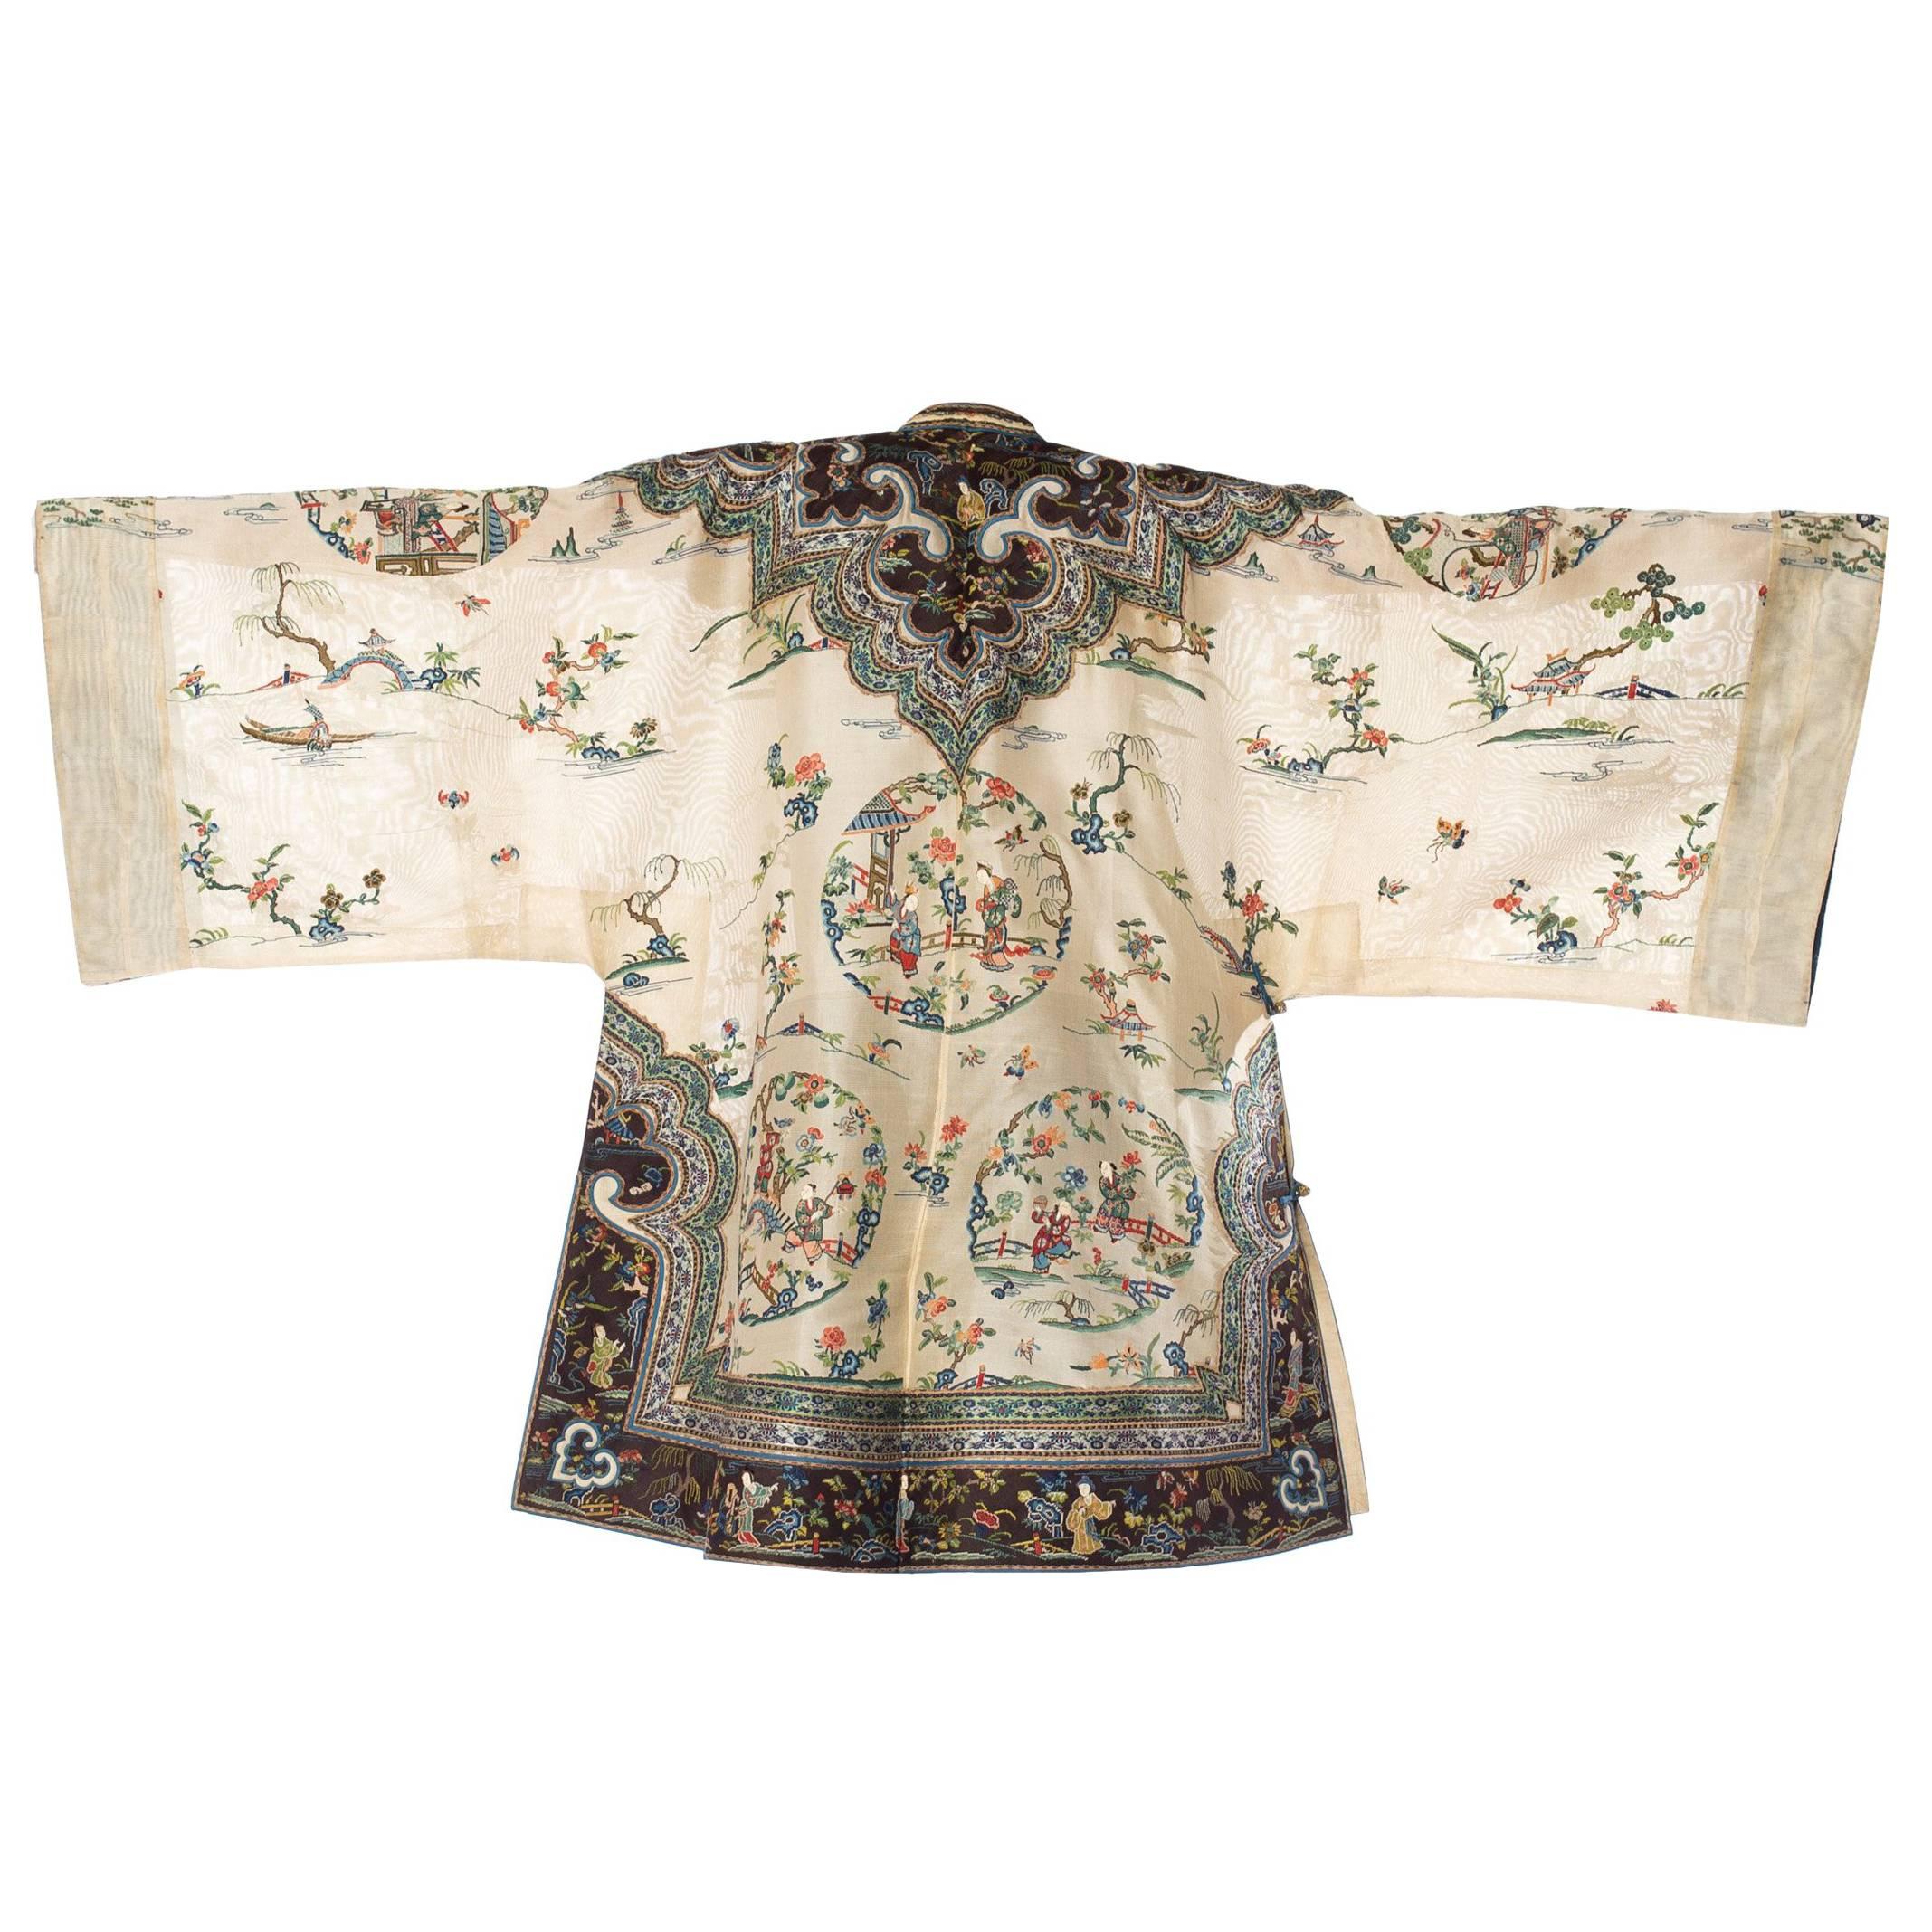 Antique Chinese Kimono Style Jacket Hand Embroidered with Floral Motifs